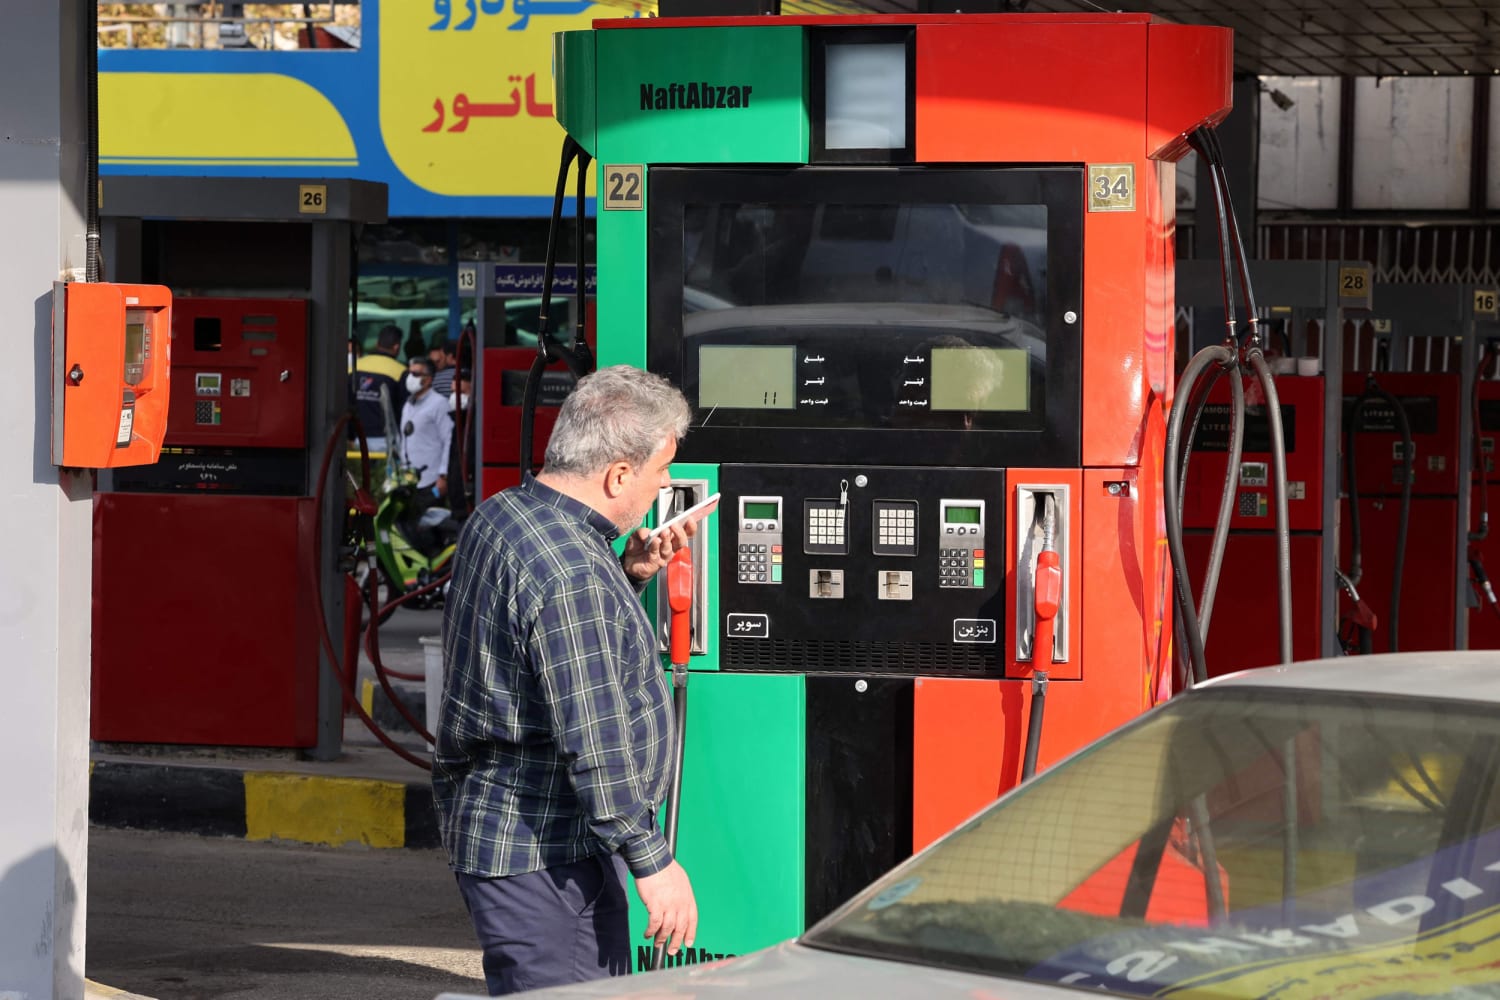 Cyberattack blamed as Iran gas stations hit with major disruptions